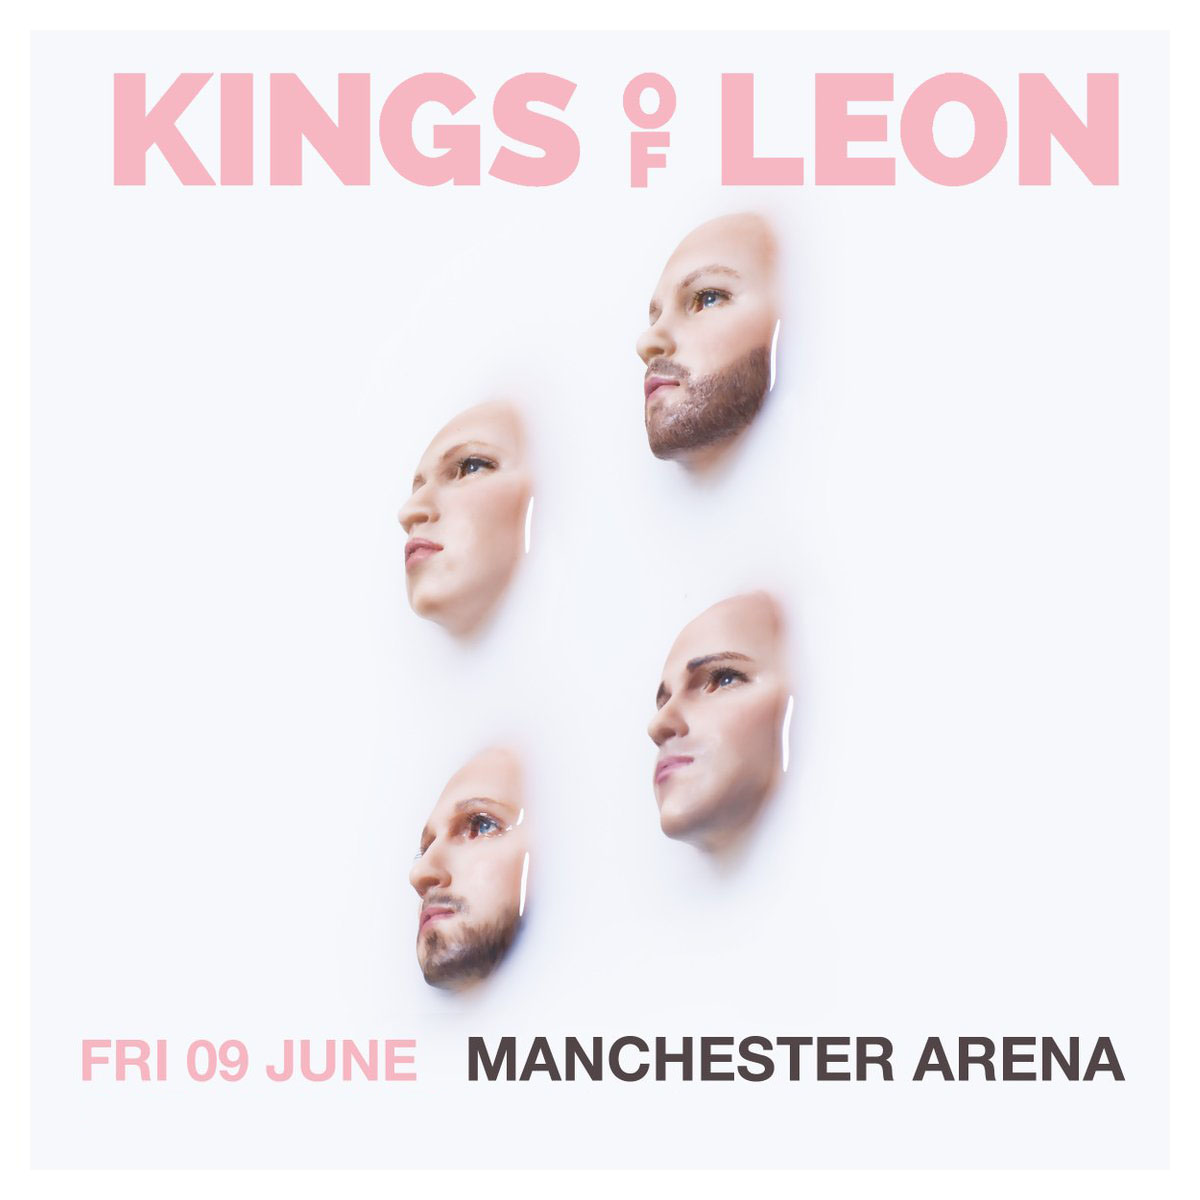 Buy Kings Of Leon tickets, Kings Of Leon tour details, Kings Of Leon